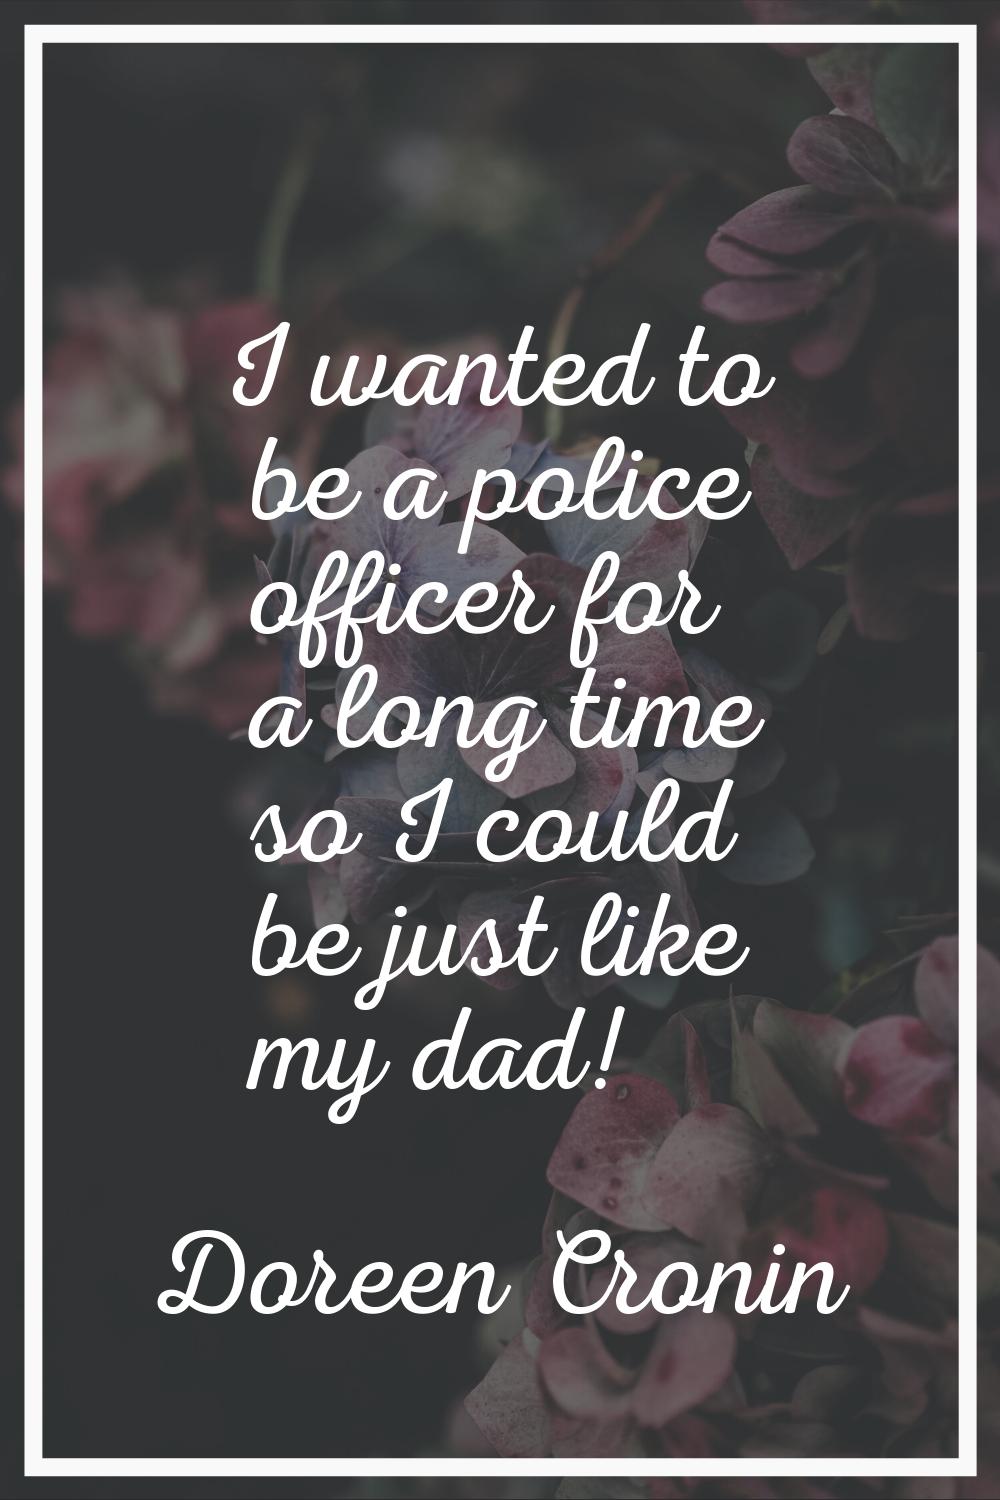 I wanted to be a police officer for a long time so I could be just like my dad!